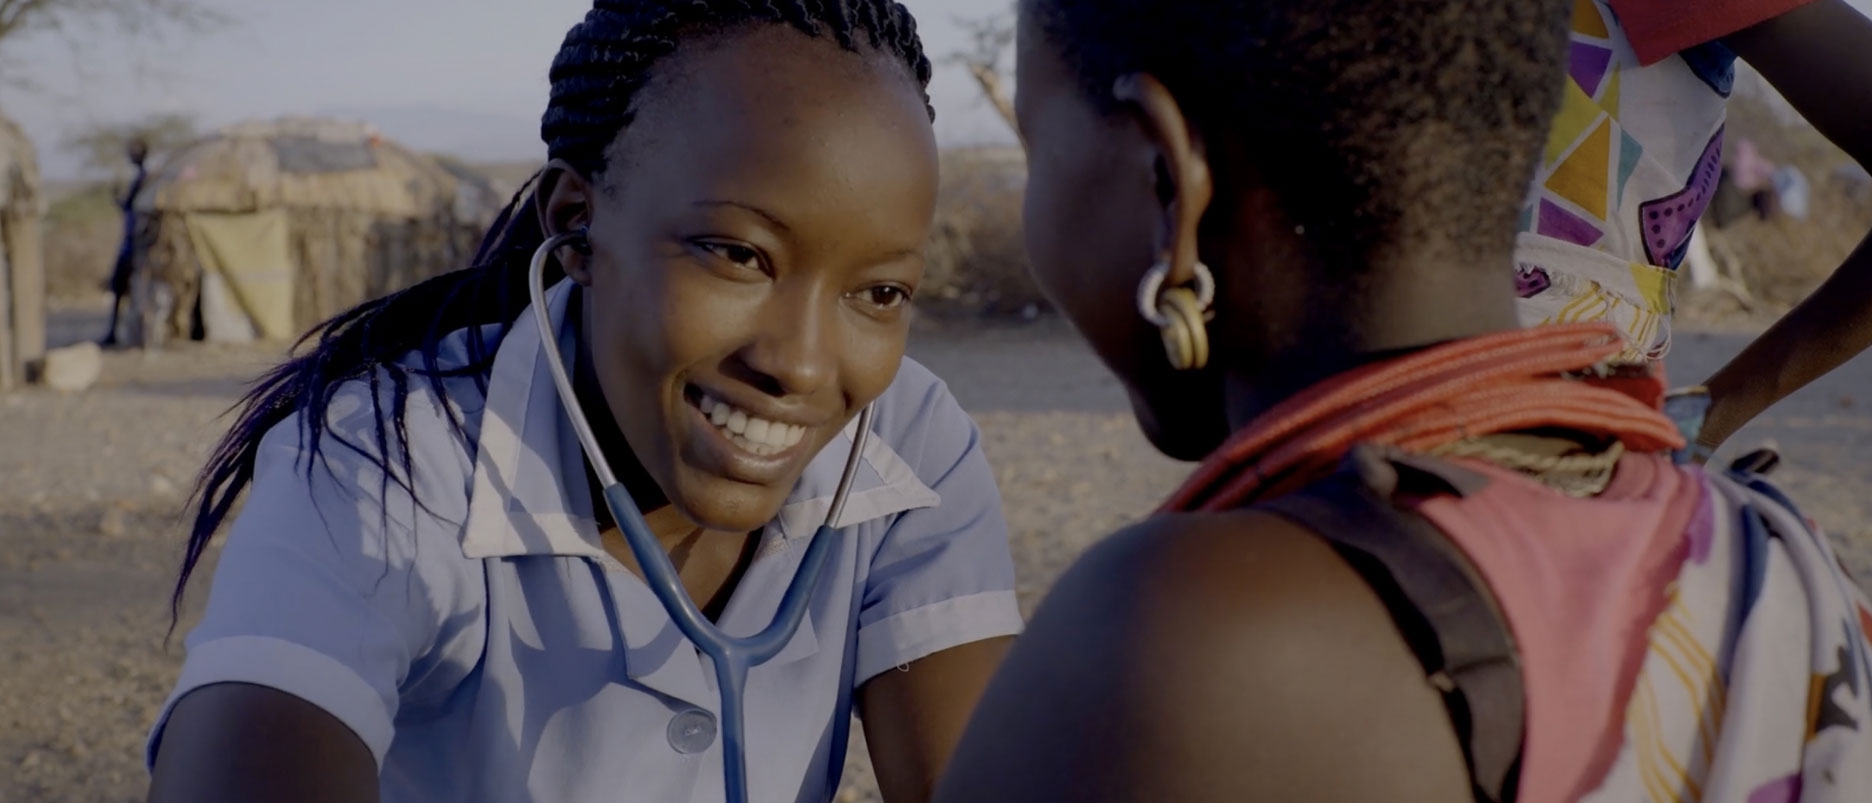 An image of a smiling nurse listening to the heart of a patient with a stethoscope in a rural setting